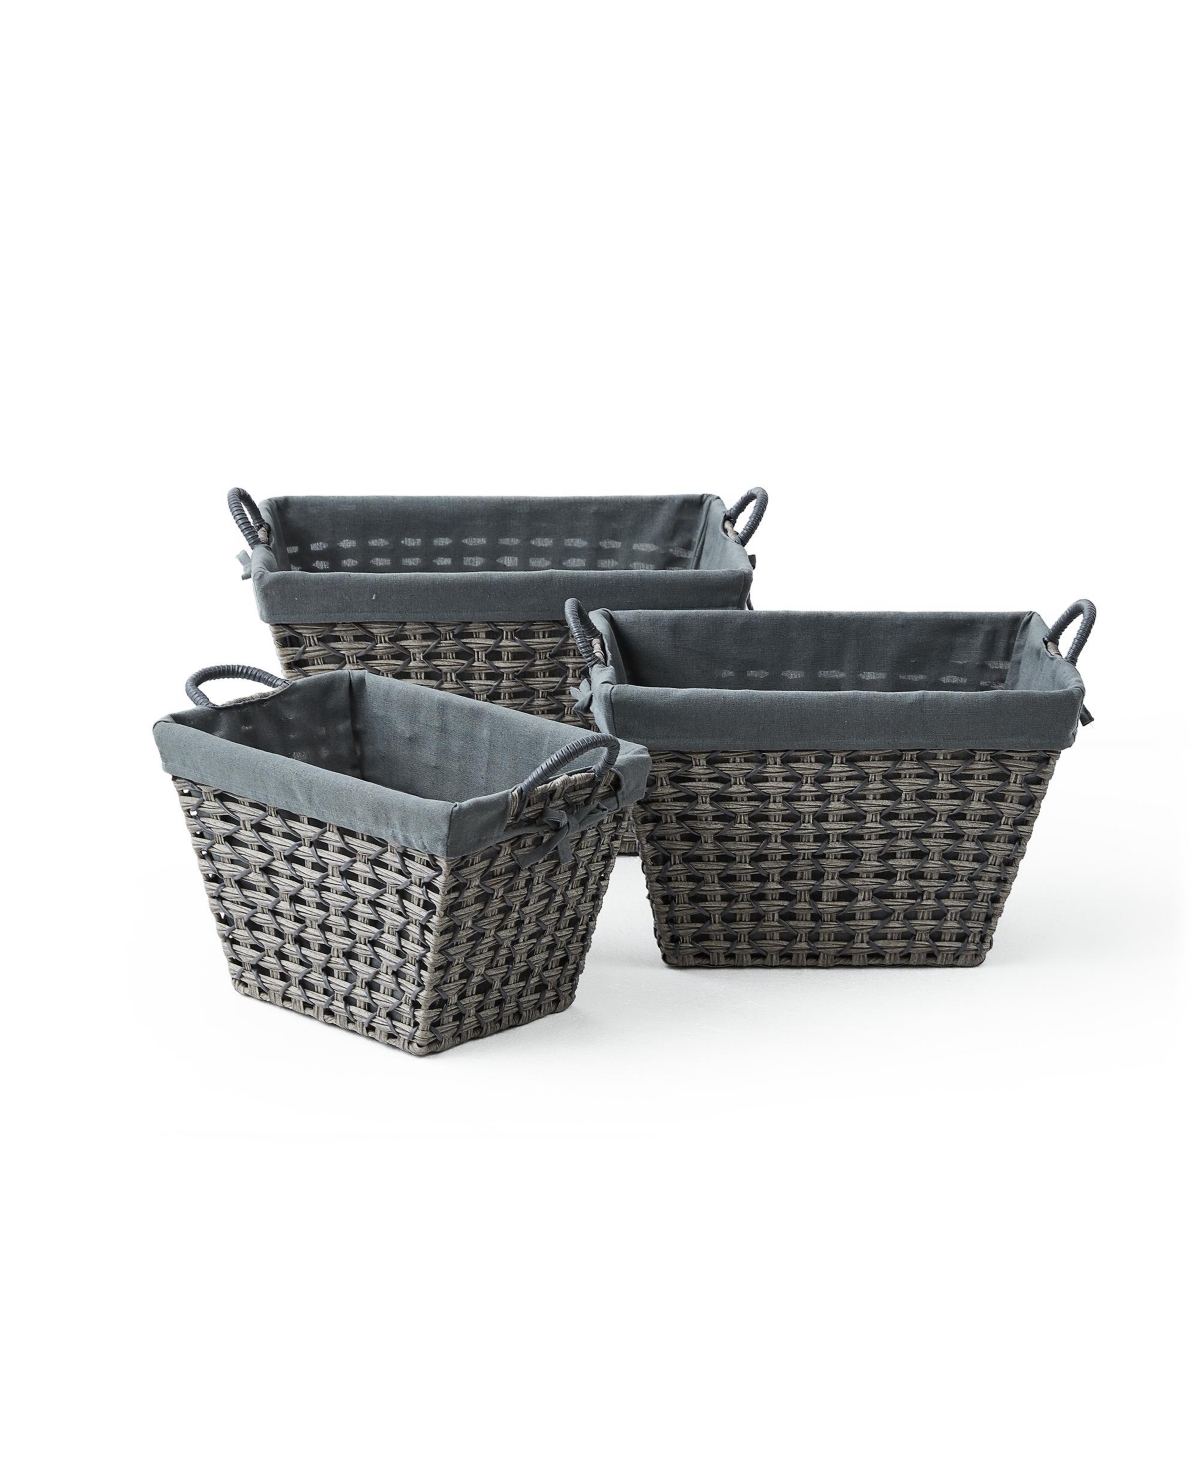 Baum 3 Piece Tapered Rectangular Storage Set In Open Weave With Ear Handles And Overlap Lift-off Liner In Gray